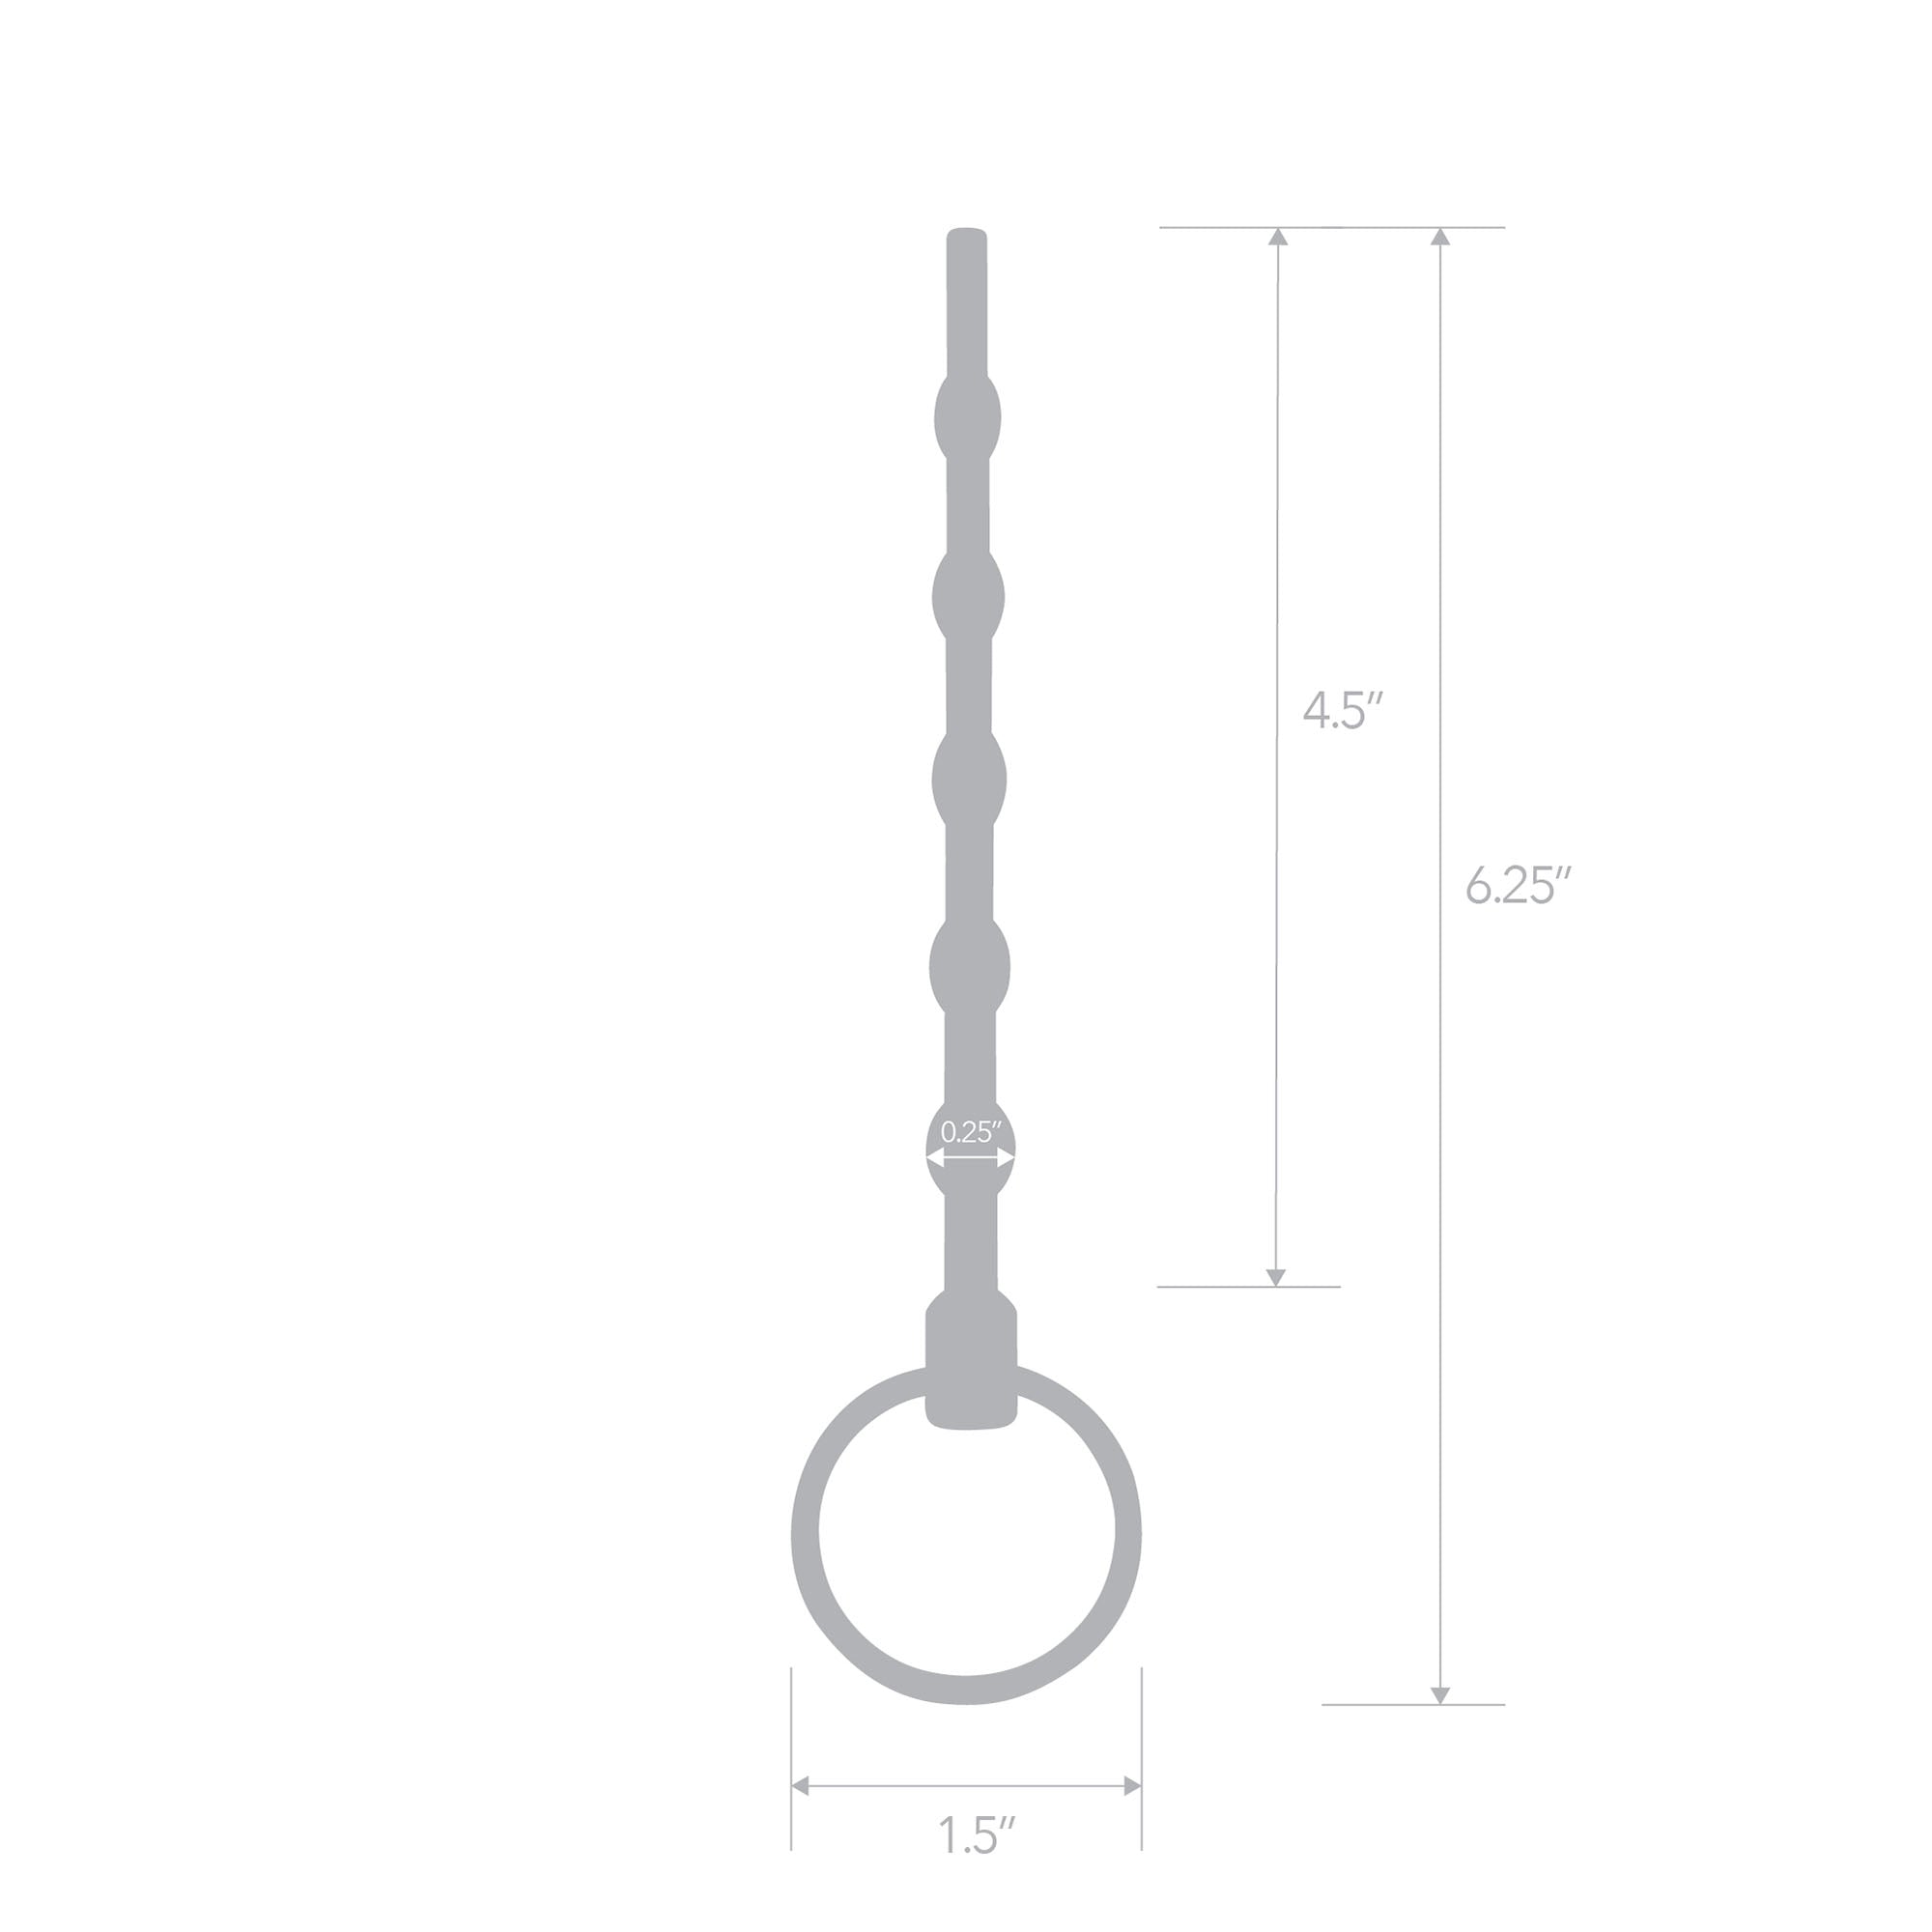 4.5" Stainless Steel Beaded Urethral Sound